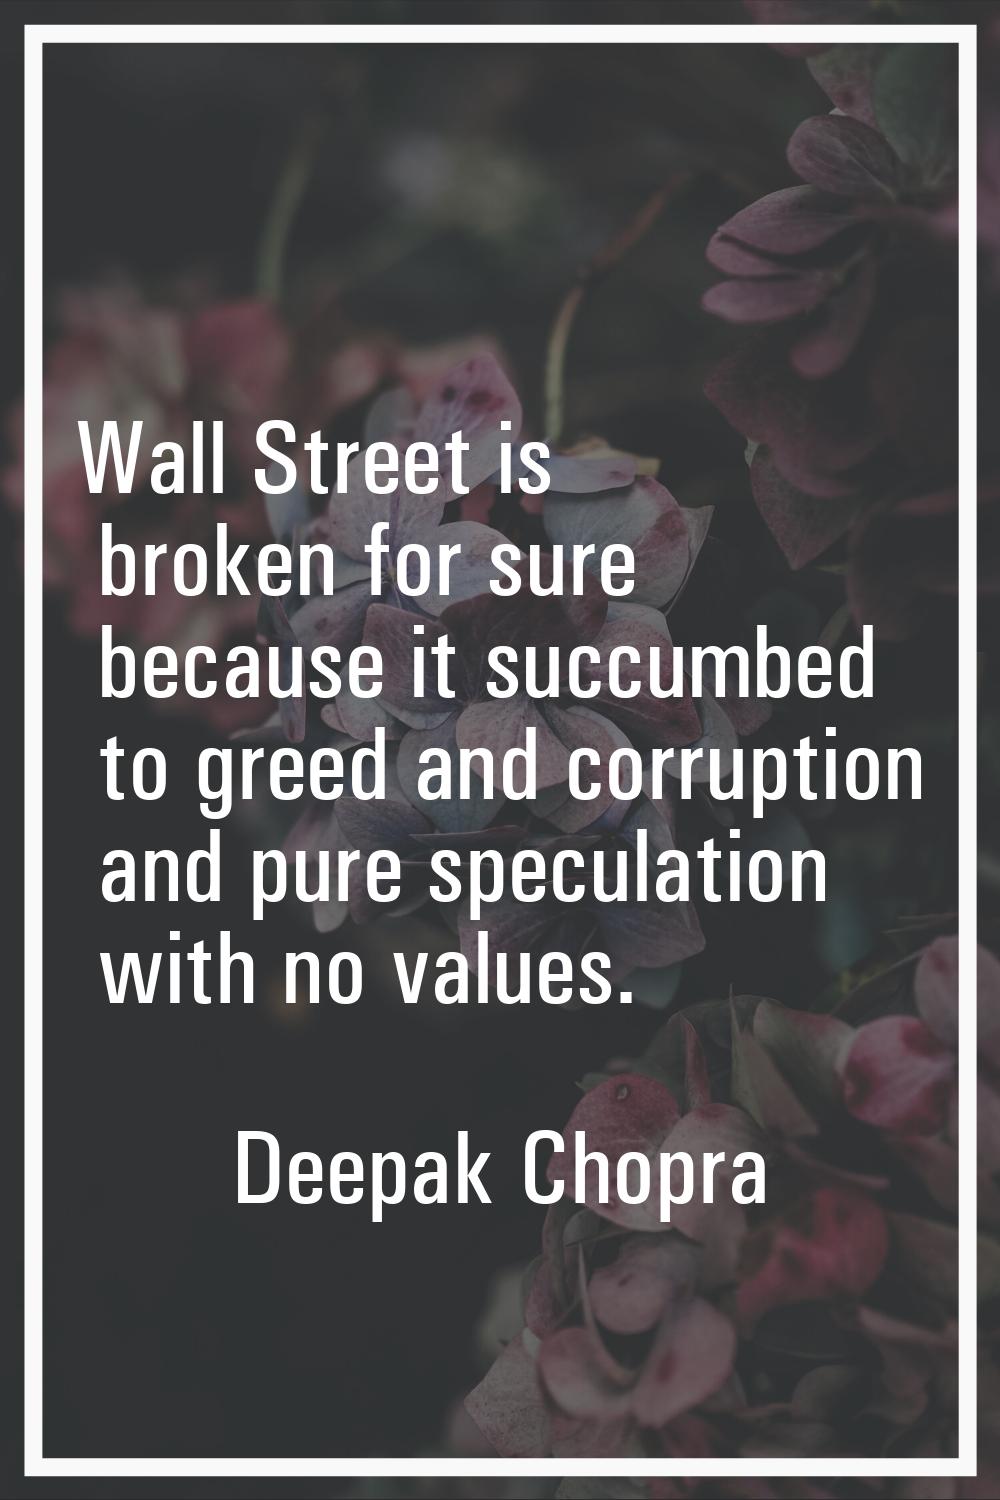 Wall Street is broken for sure because it succumbed to greed and corruption and pure speculation wi